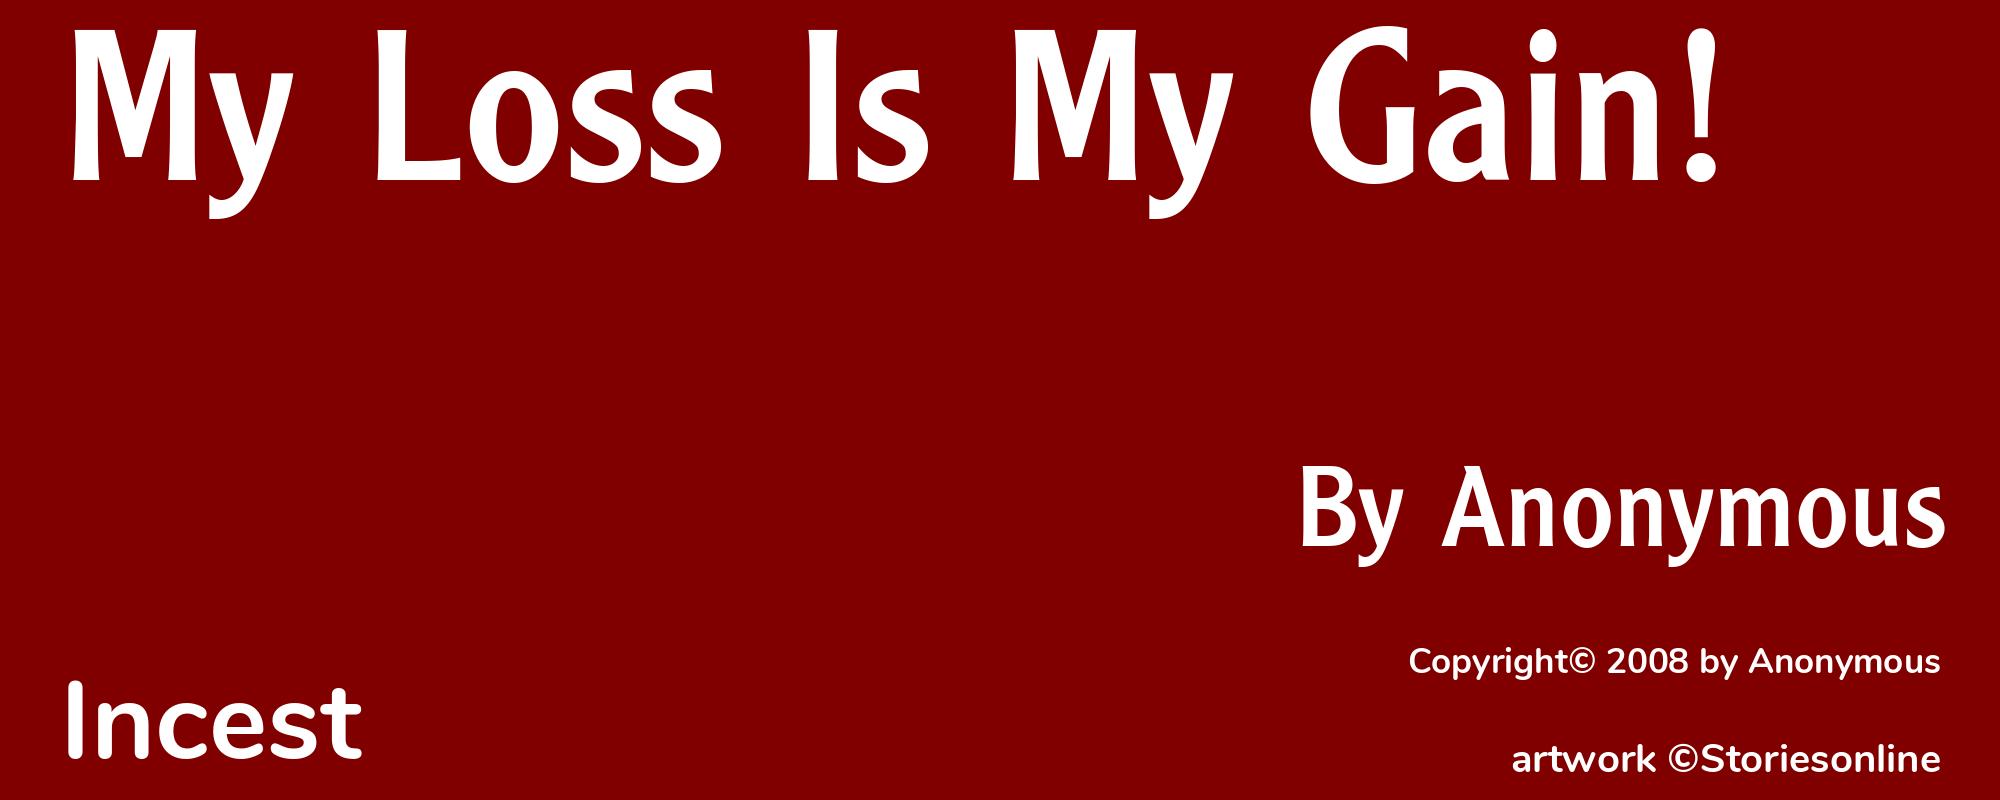 My Loss Is My Gain! - Cover